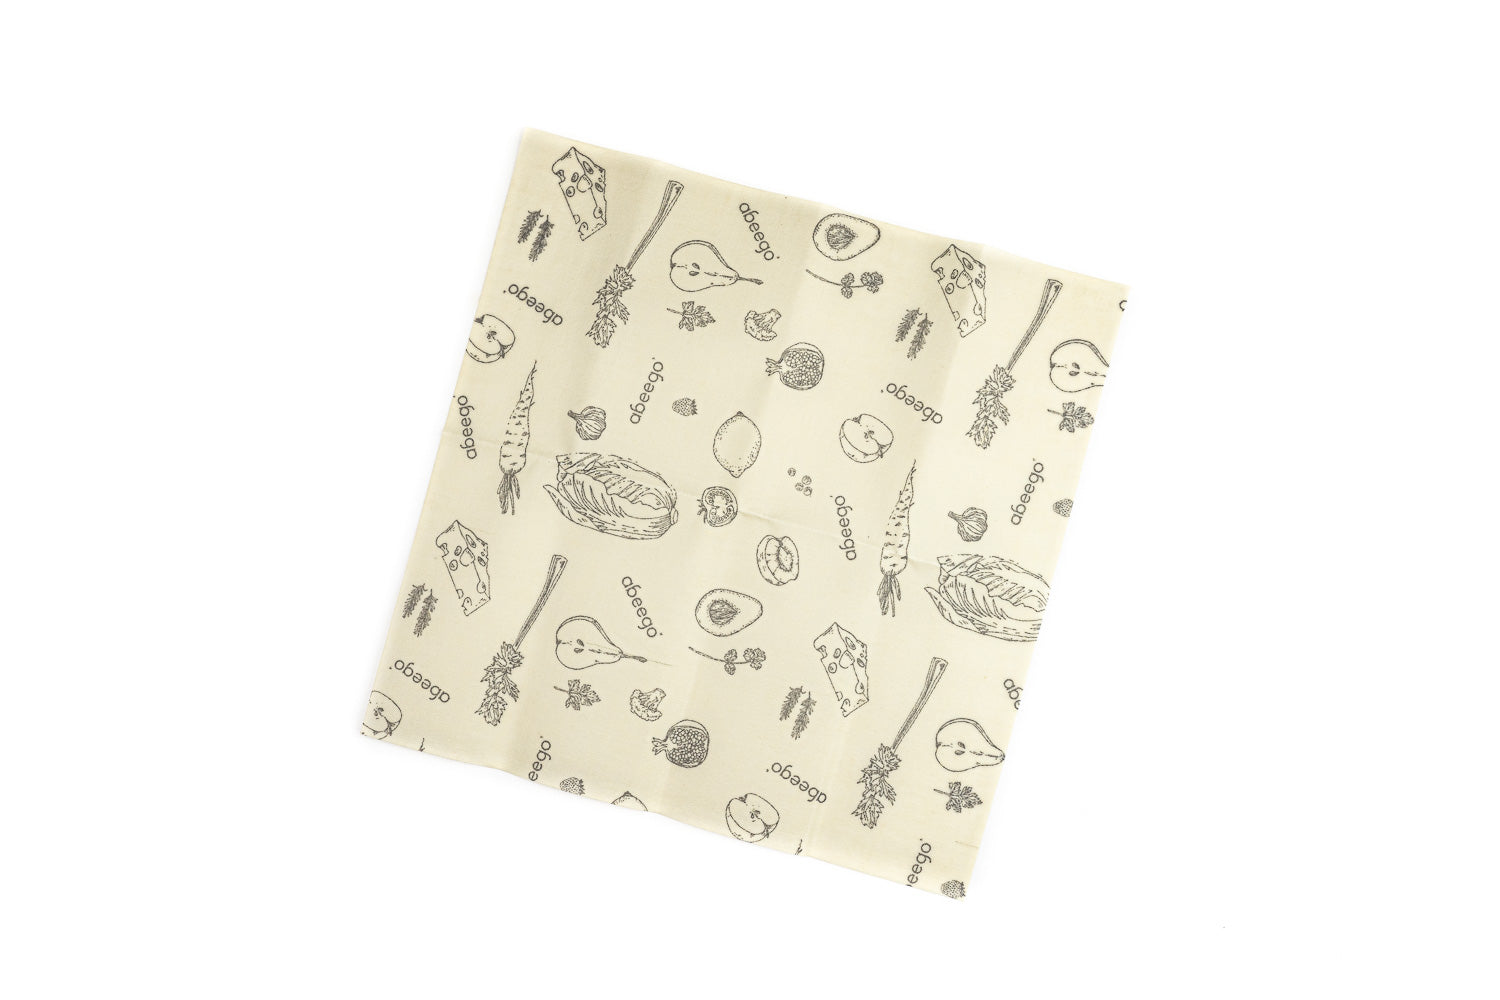 Abeego Reusable Beeswax Food Wrap - Square